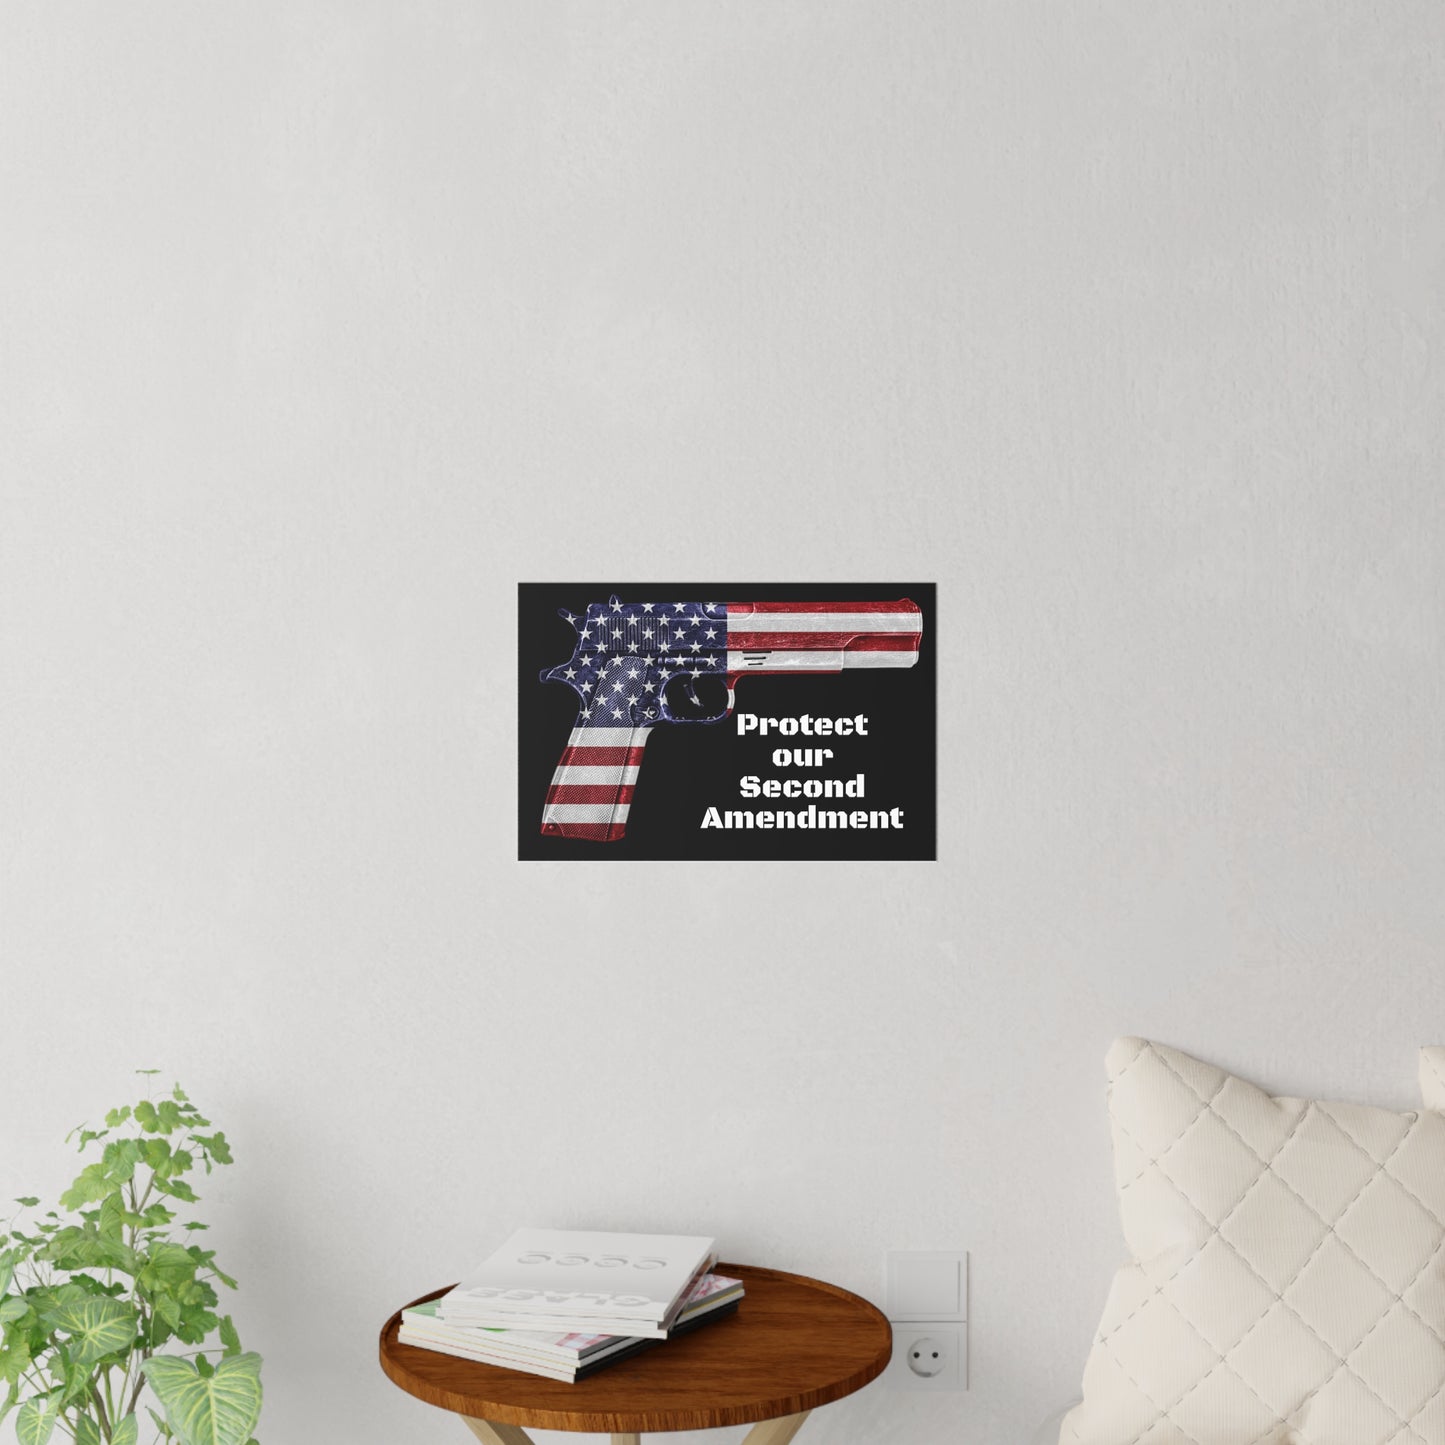 Protect our second Amendment 2A American Flag Pistol sticky Wall Decals 3 sizes